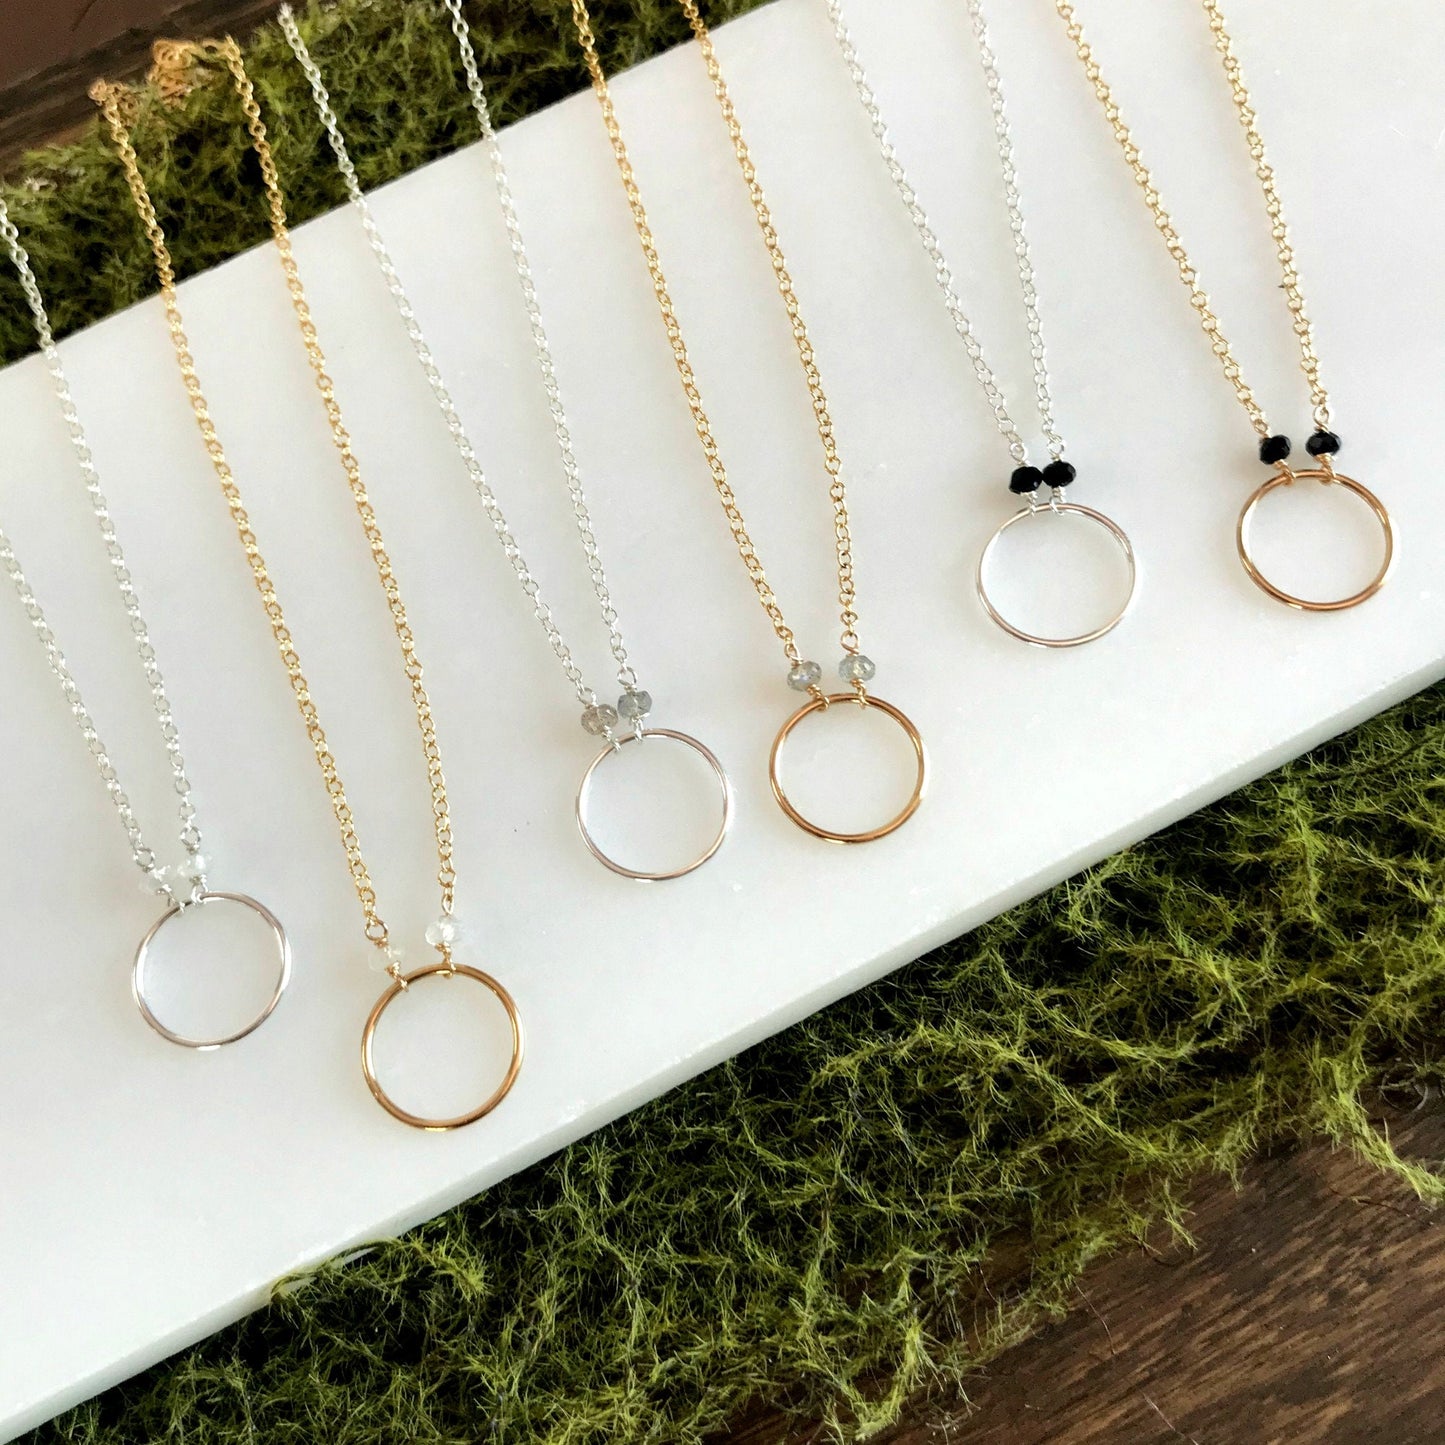 Karma Necklace Circle Necklace Delicate Necklace Eternity Necklace Minimalist Necklace Boho Necklace Infinity Necklace Gift for Mother